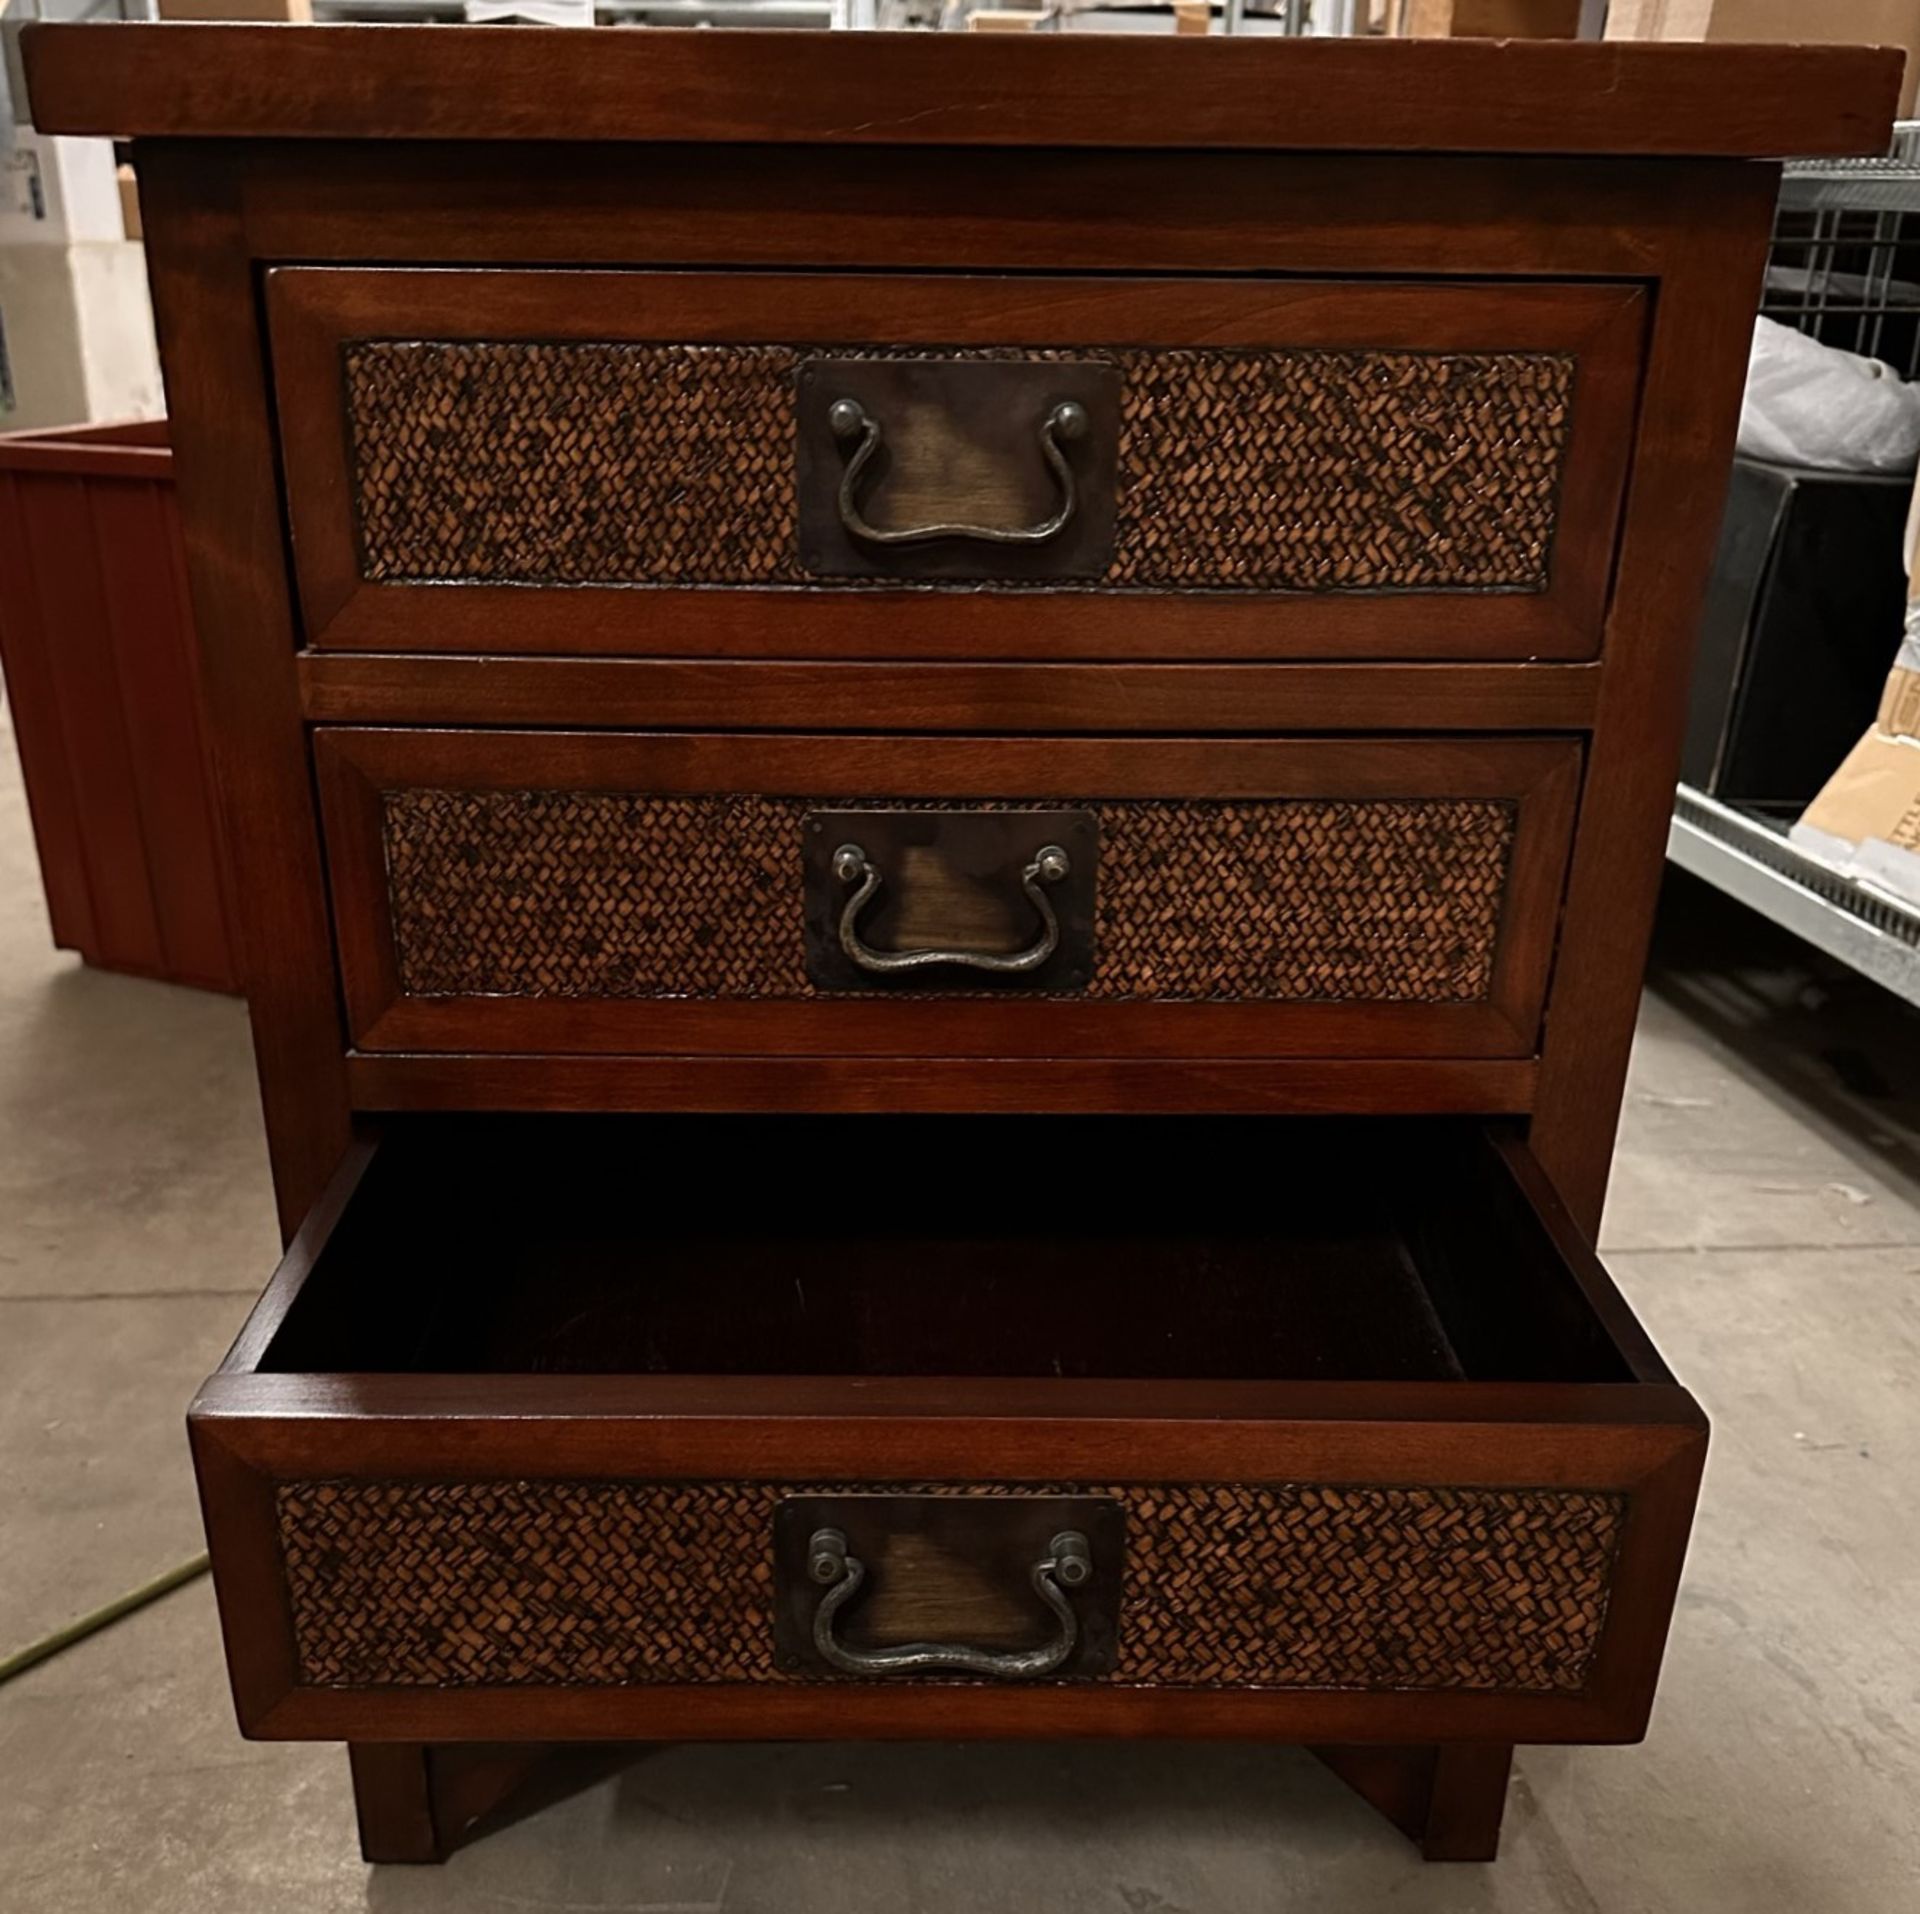 2 x SOLID Dark Wood Set Of Bedside Drawers With Bronze Catches And Rattan Detail  - From An Upmarket - Image 3 of 5